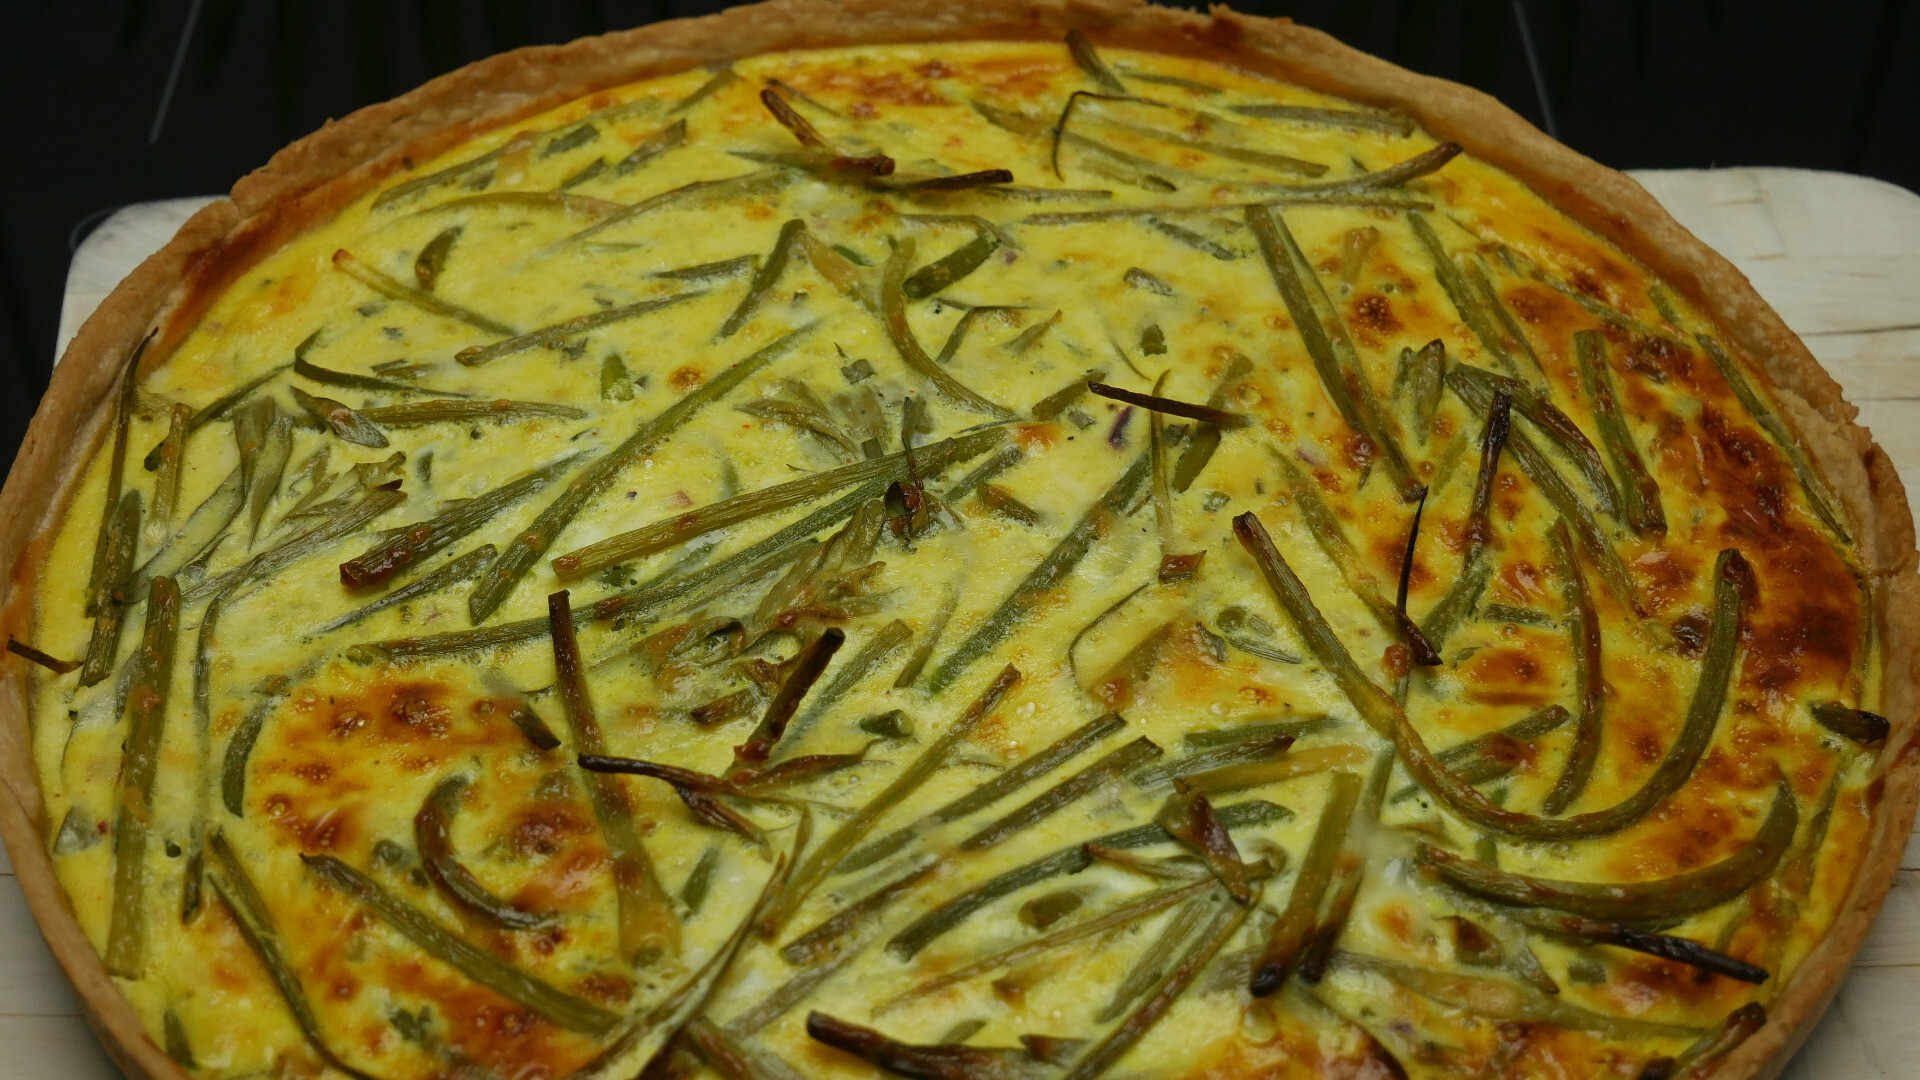 quiche made with garlic flowers and tarragon shoots